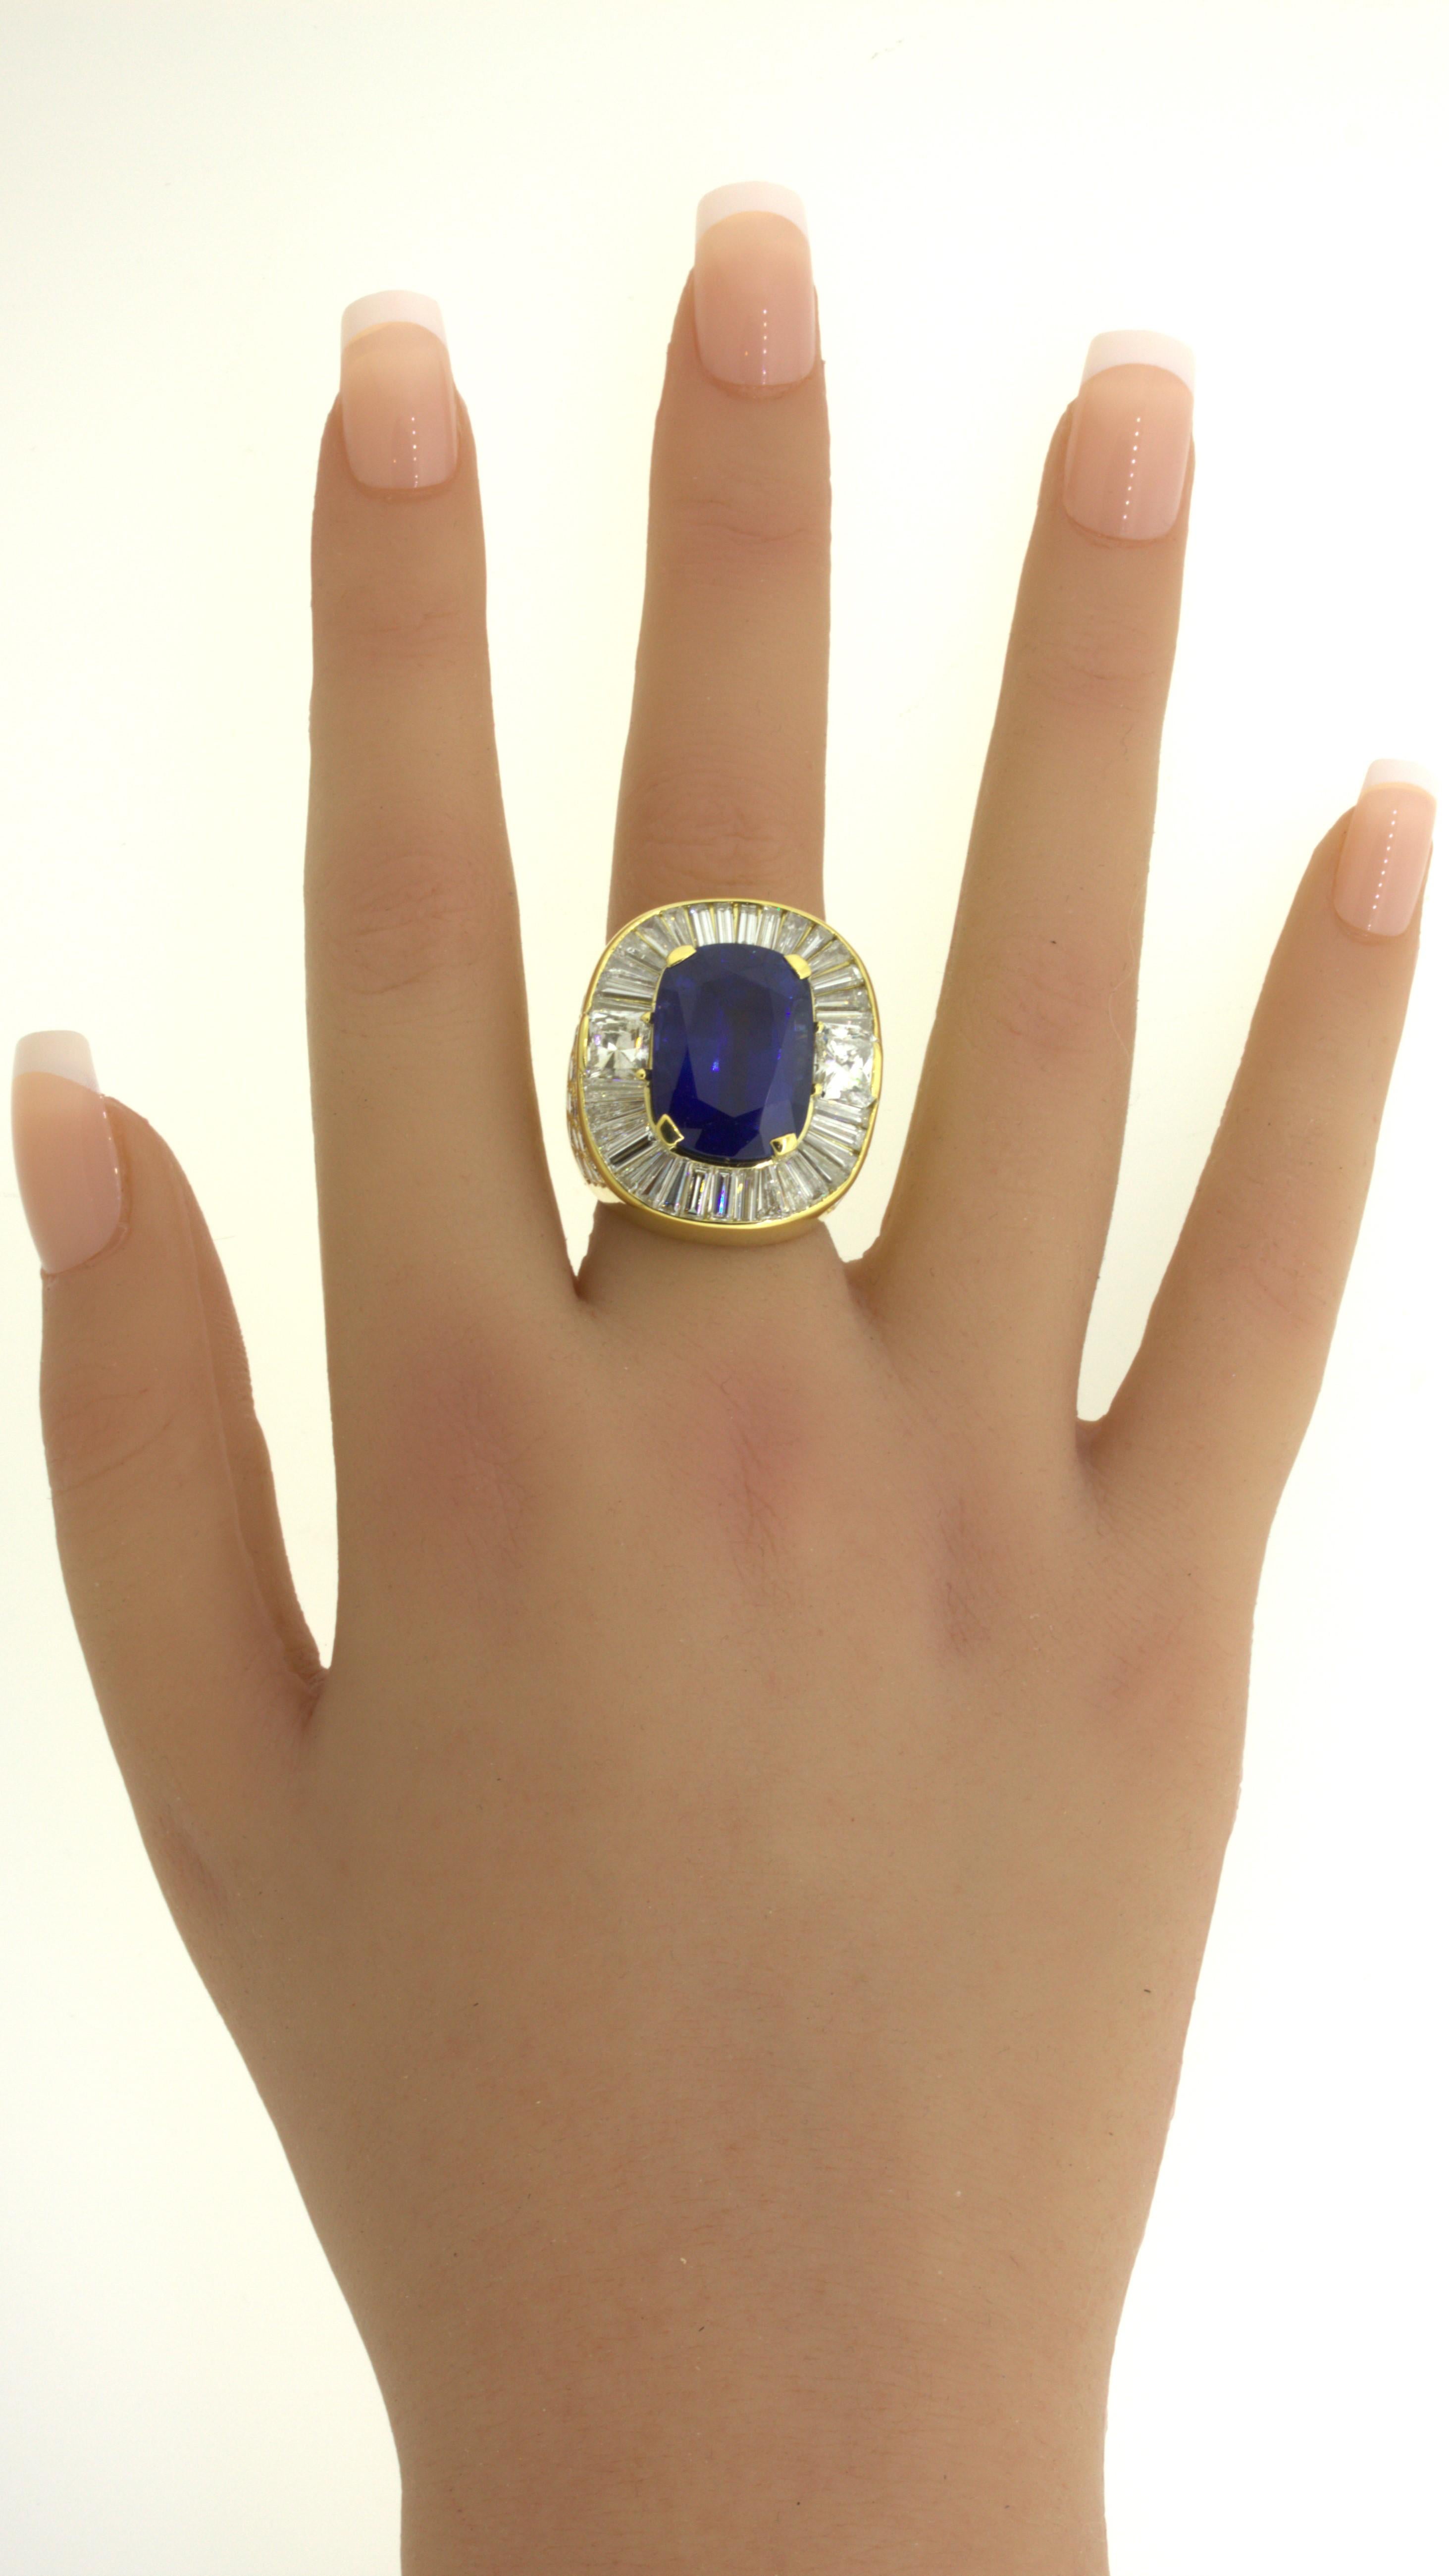 19.36 Carat Ceylon Sapphire Diamond 18K Yellow Gold Cocktail Ring, GIA Certified For Sale 8